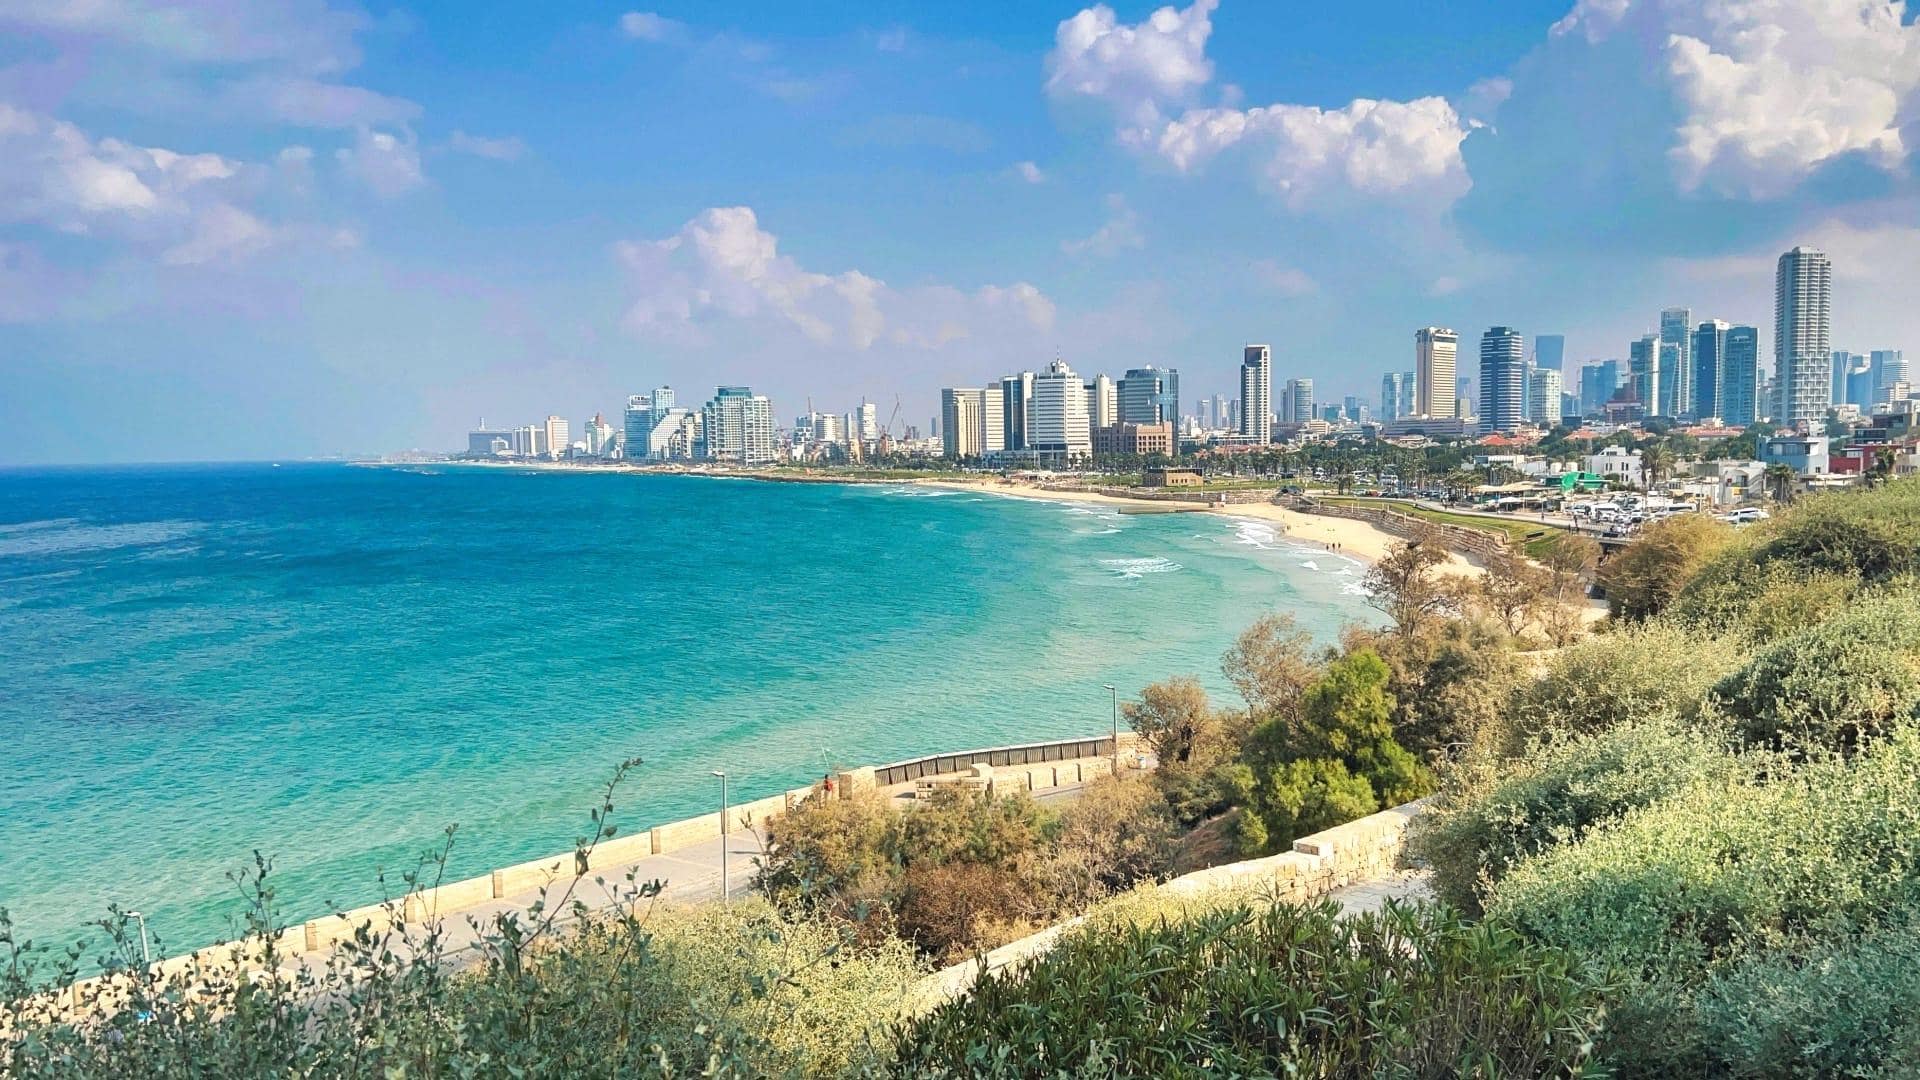 Tel Aviv is located in the Holy Land yet, weirdly, it’s never once mentioned in the Bible.